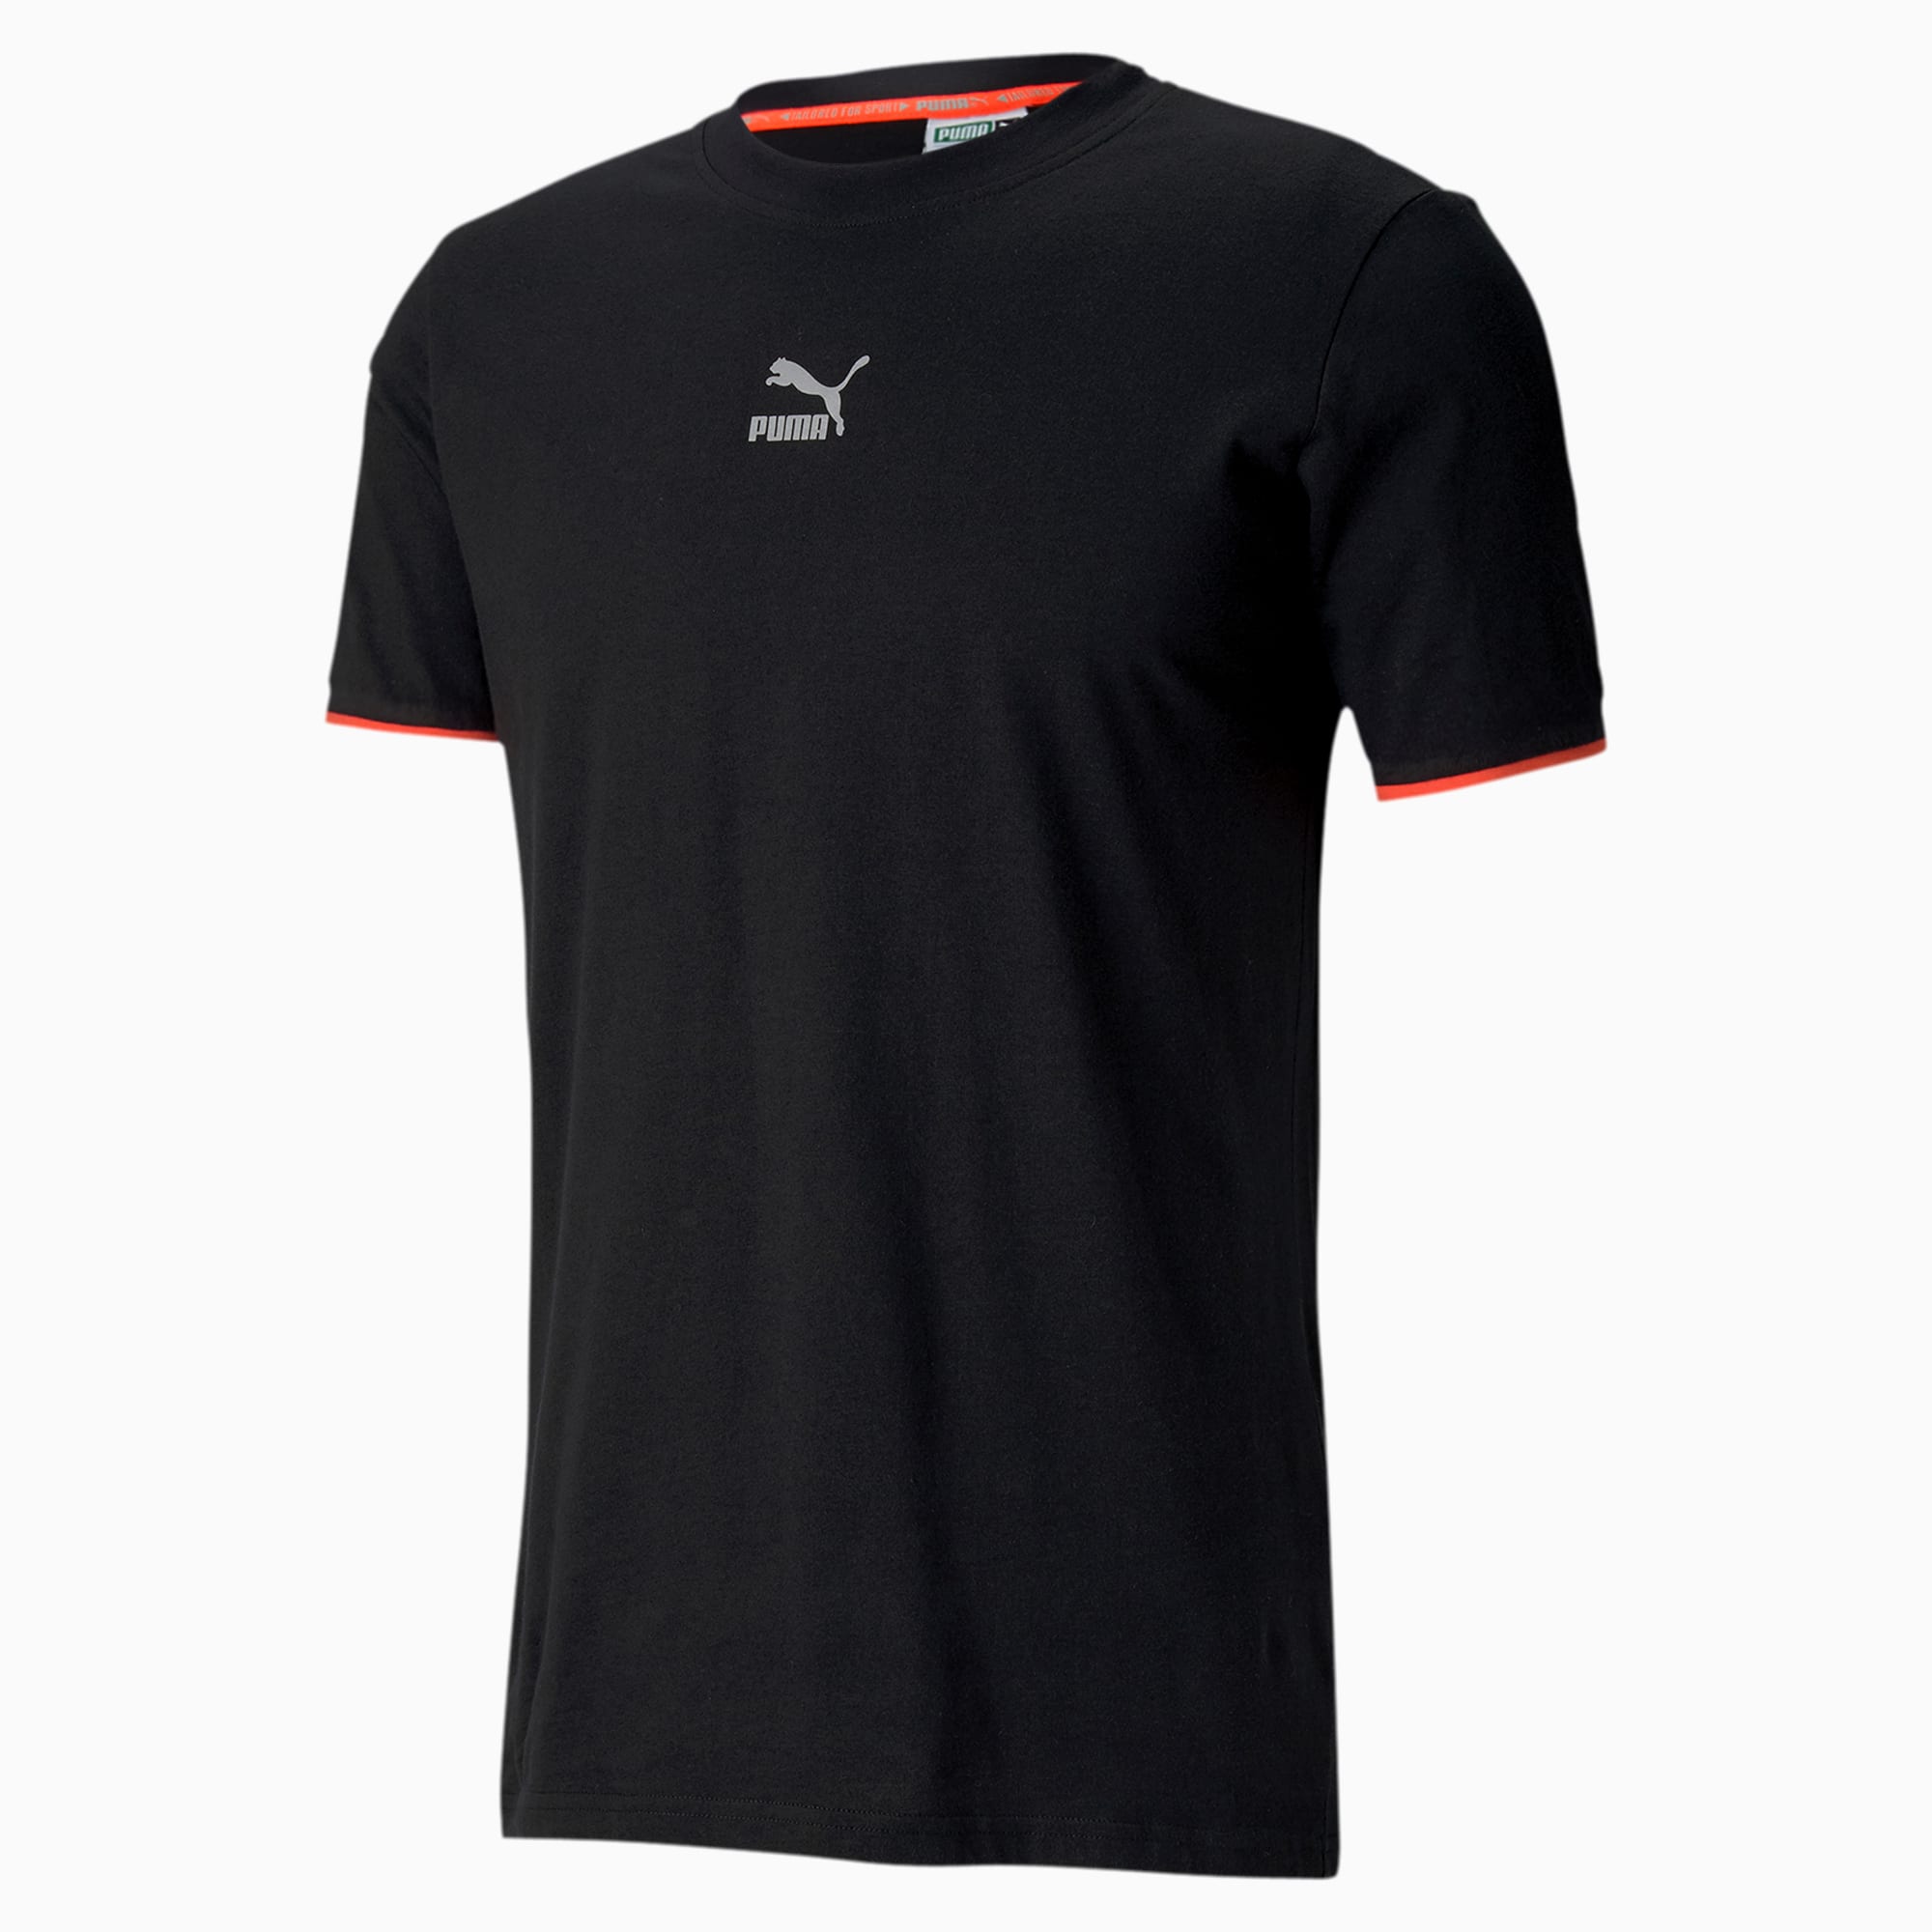 Tailored for Sport Men's Tee | PUMA US